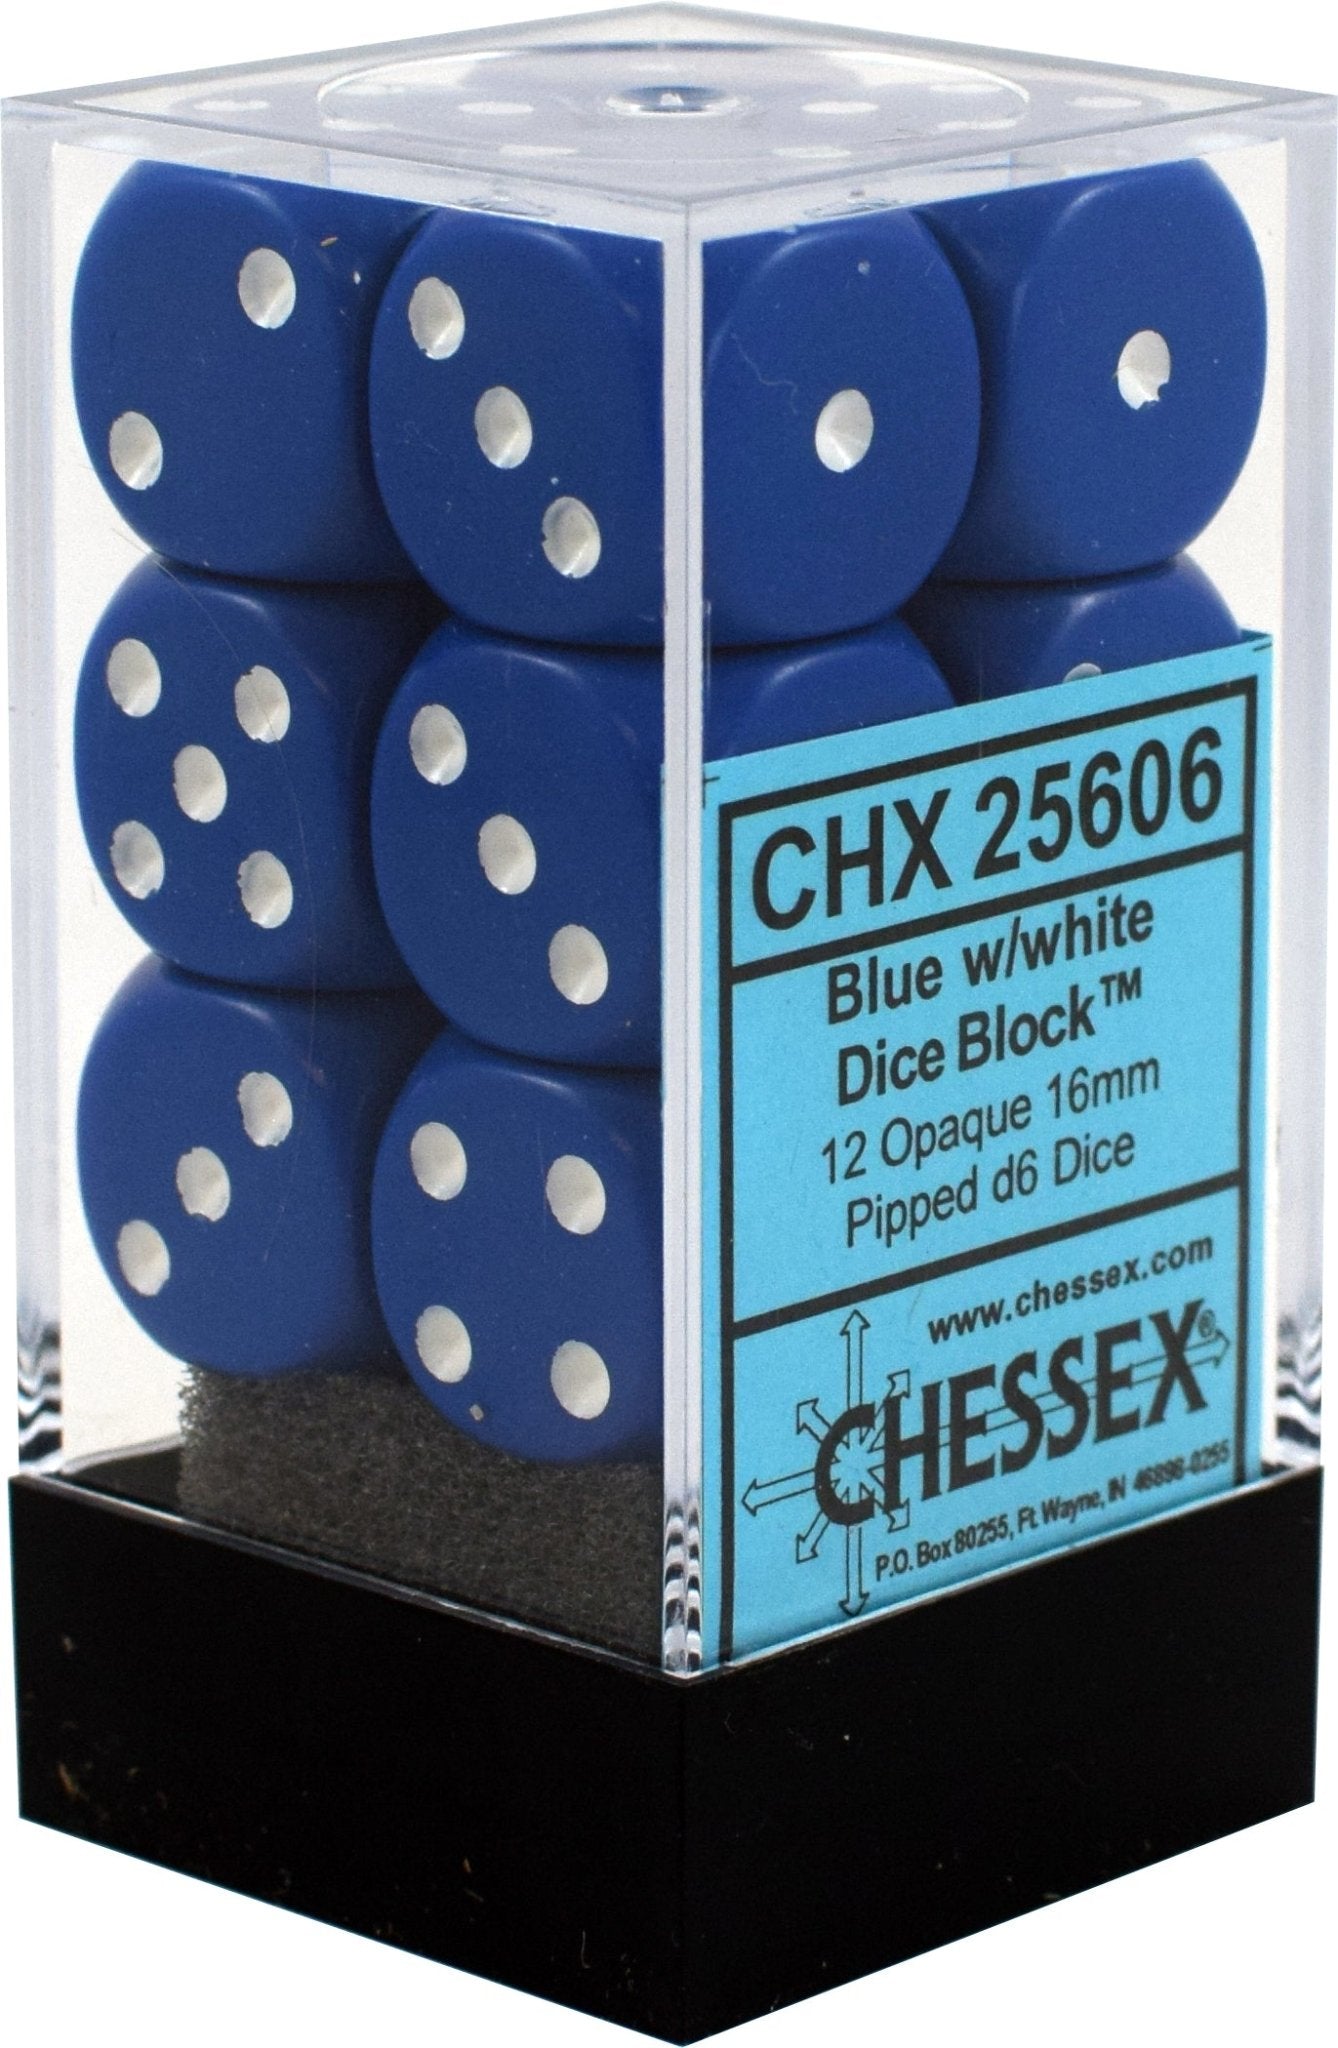 Chessex Dice: D6 Block 16mm - Opaque - Blue with White (CHX 25606) - Gamescape